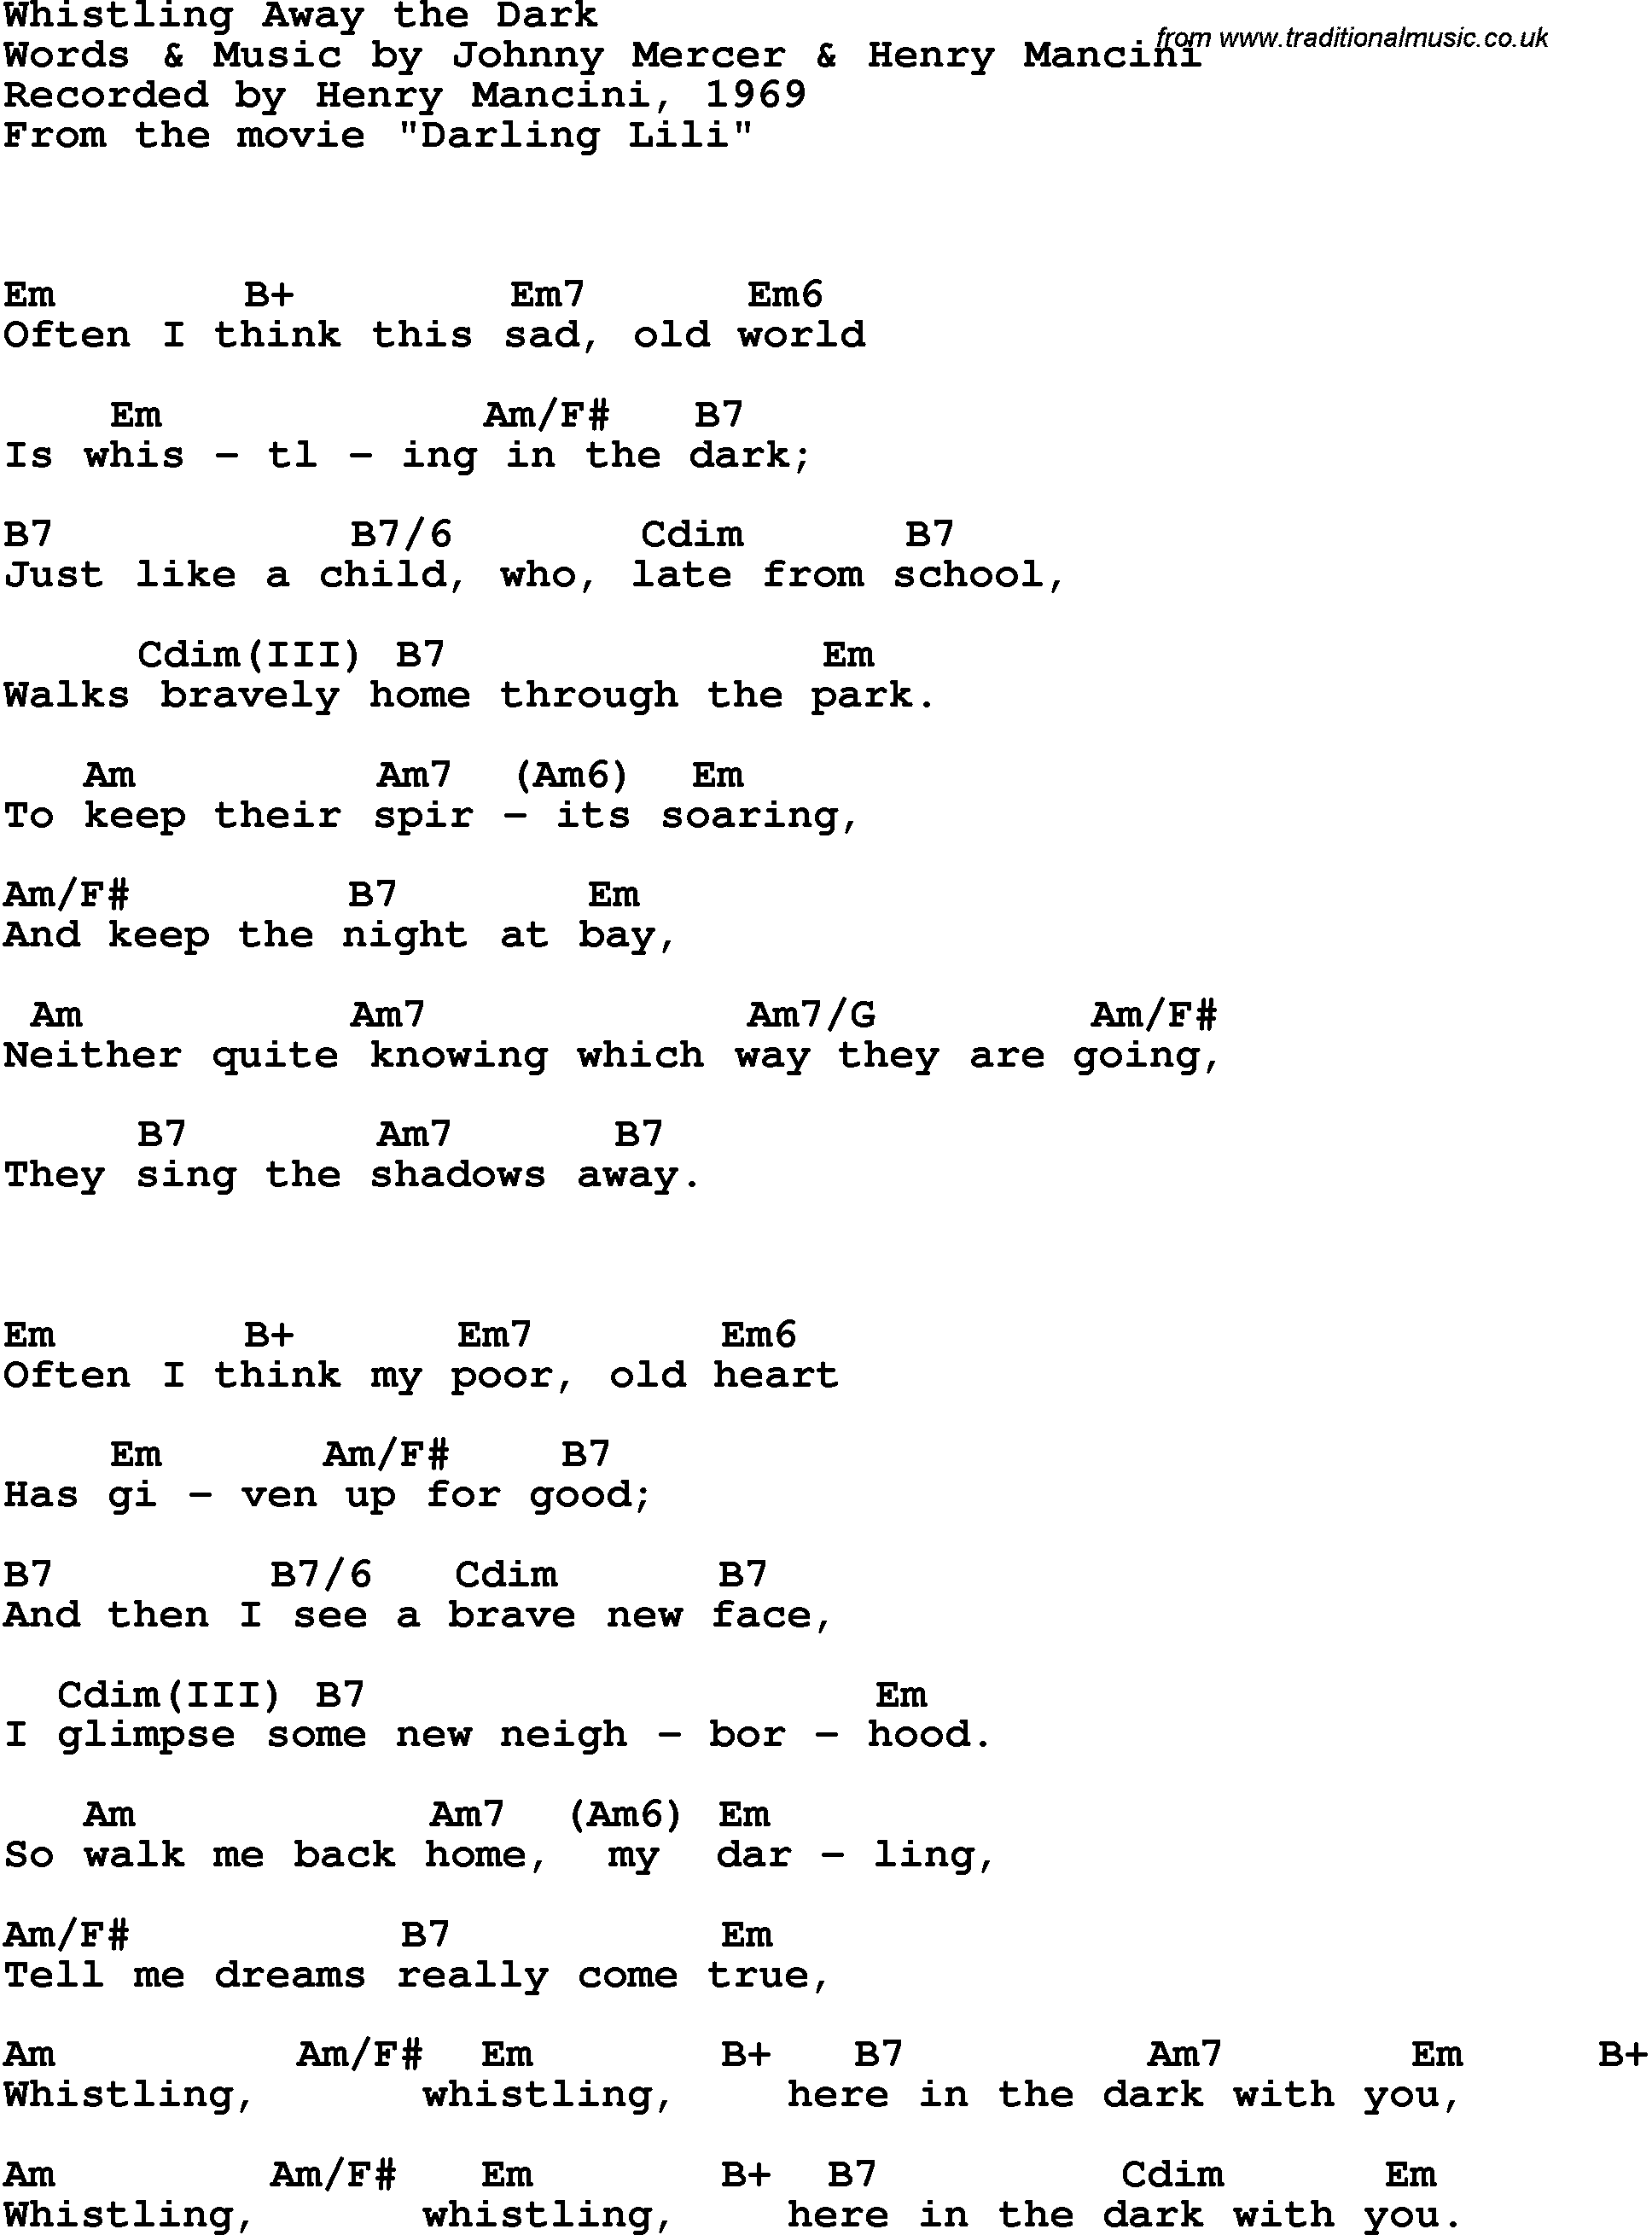 Song Lyrics with guitar chords for Whistling Away The Dark - Henry Mancini, 1969